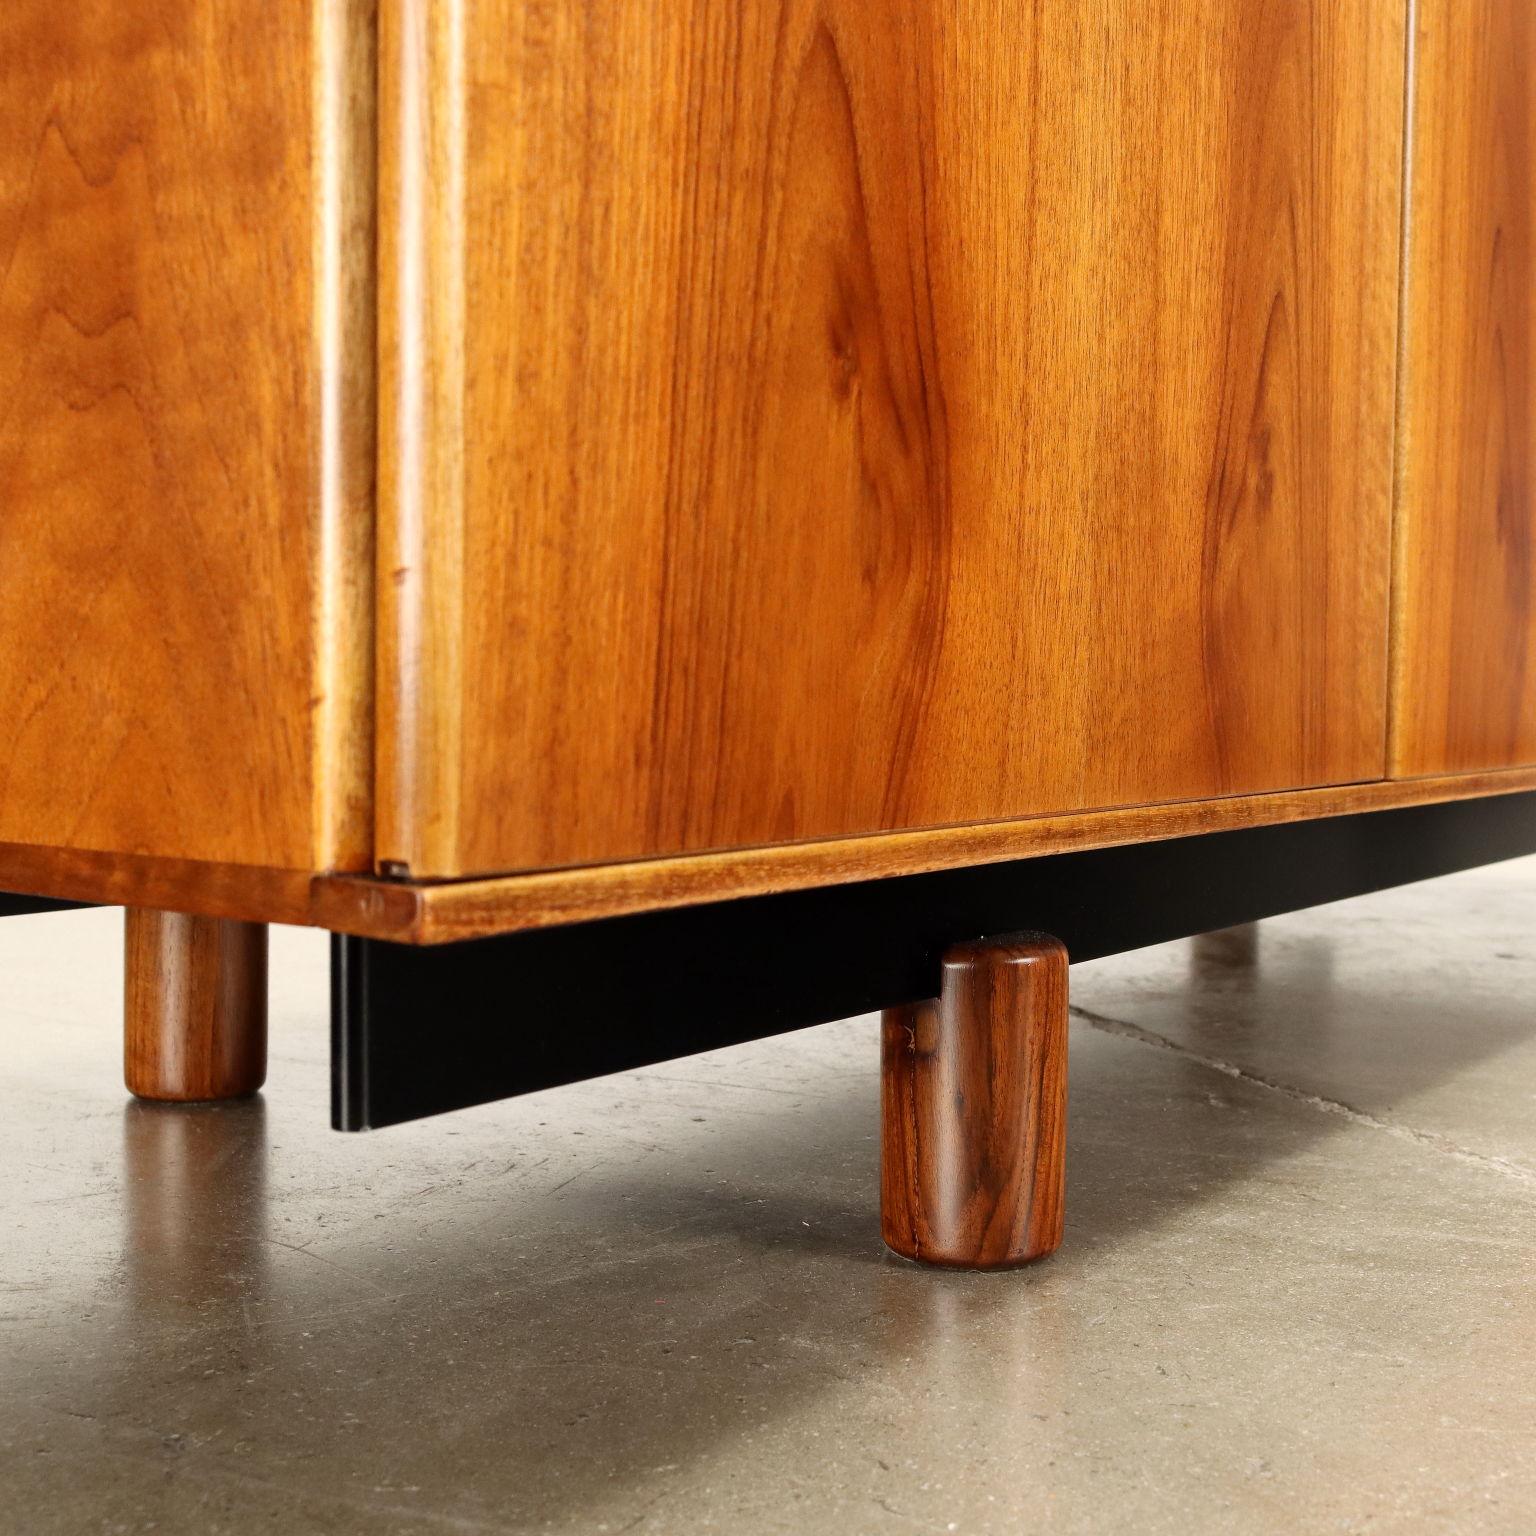 Gianfranco Frattini '809' sideboard for Bernini, 1960s, walnut In Excellent Condition For Sale In Milano, IT